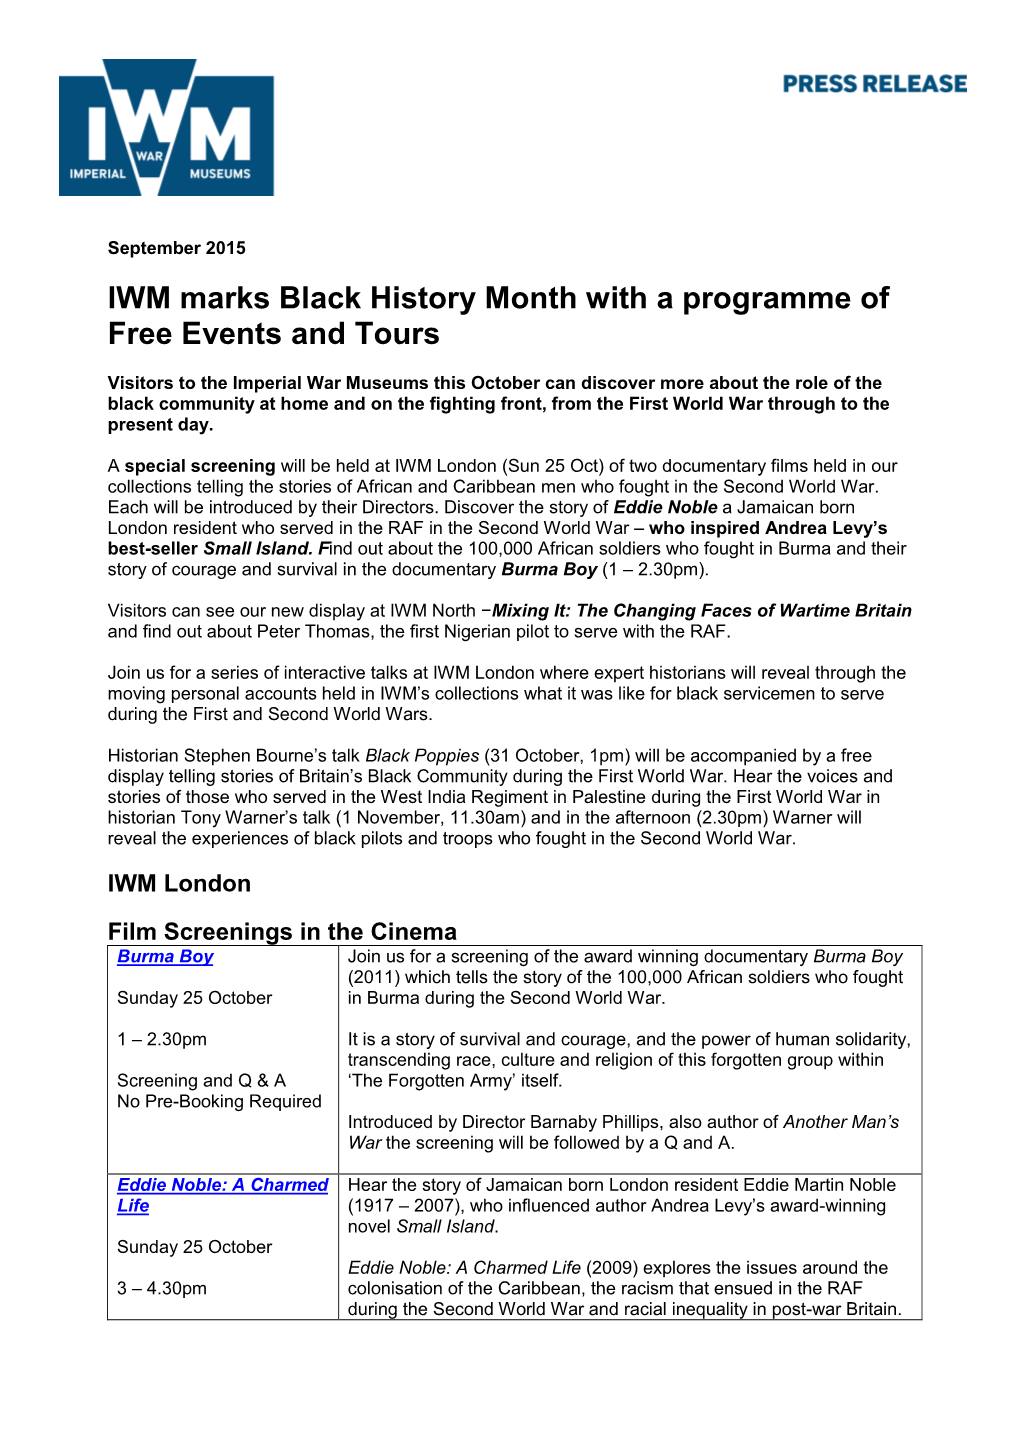 Black History Month with a Programme of Free Events and Tours